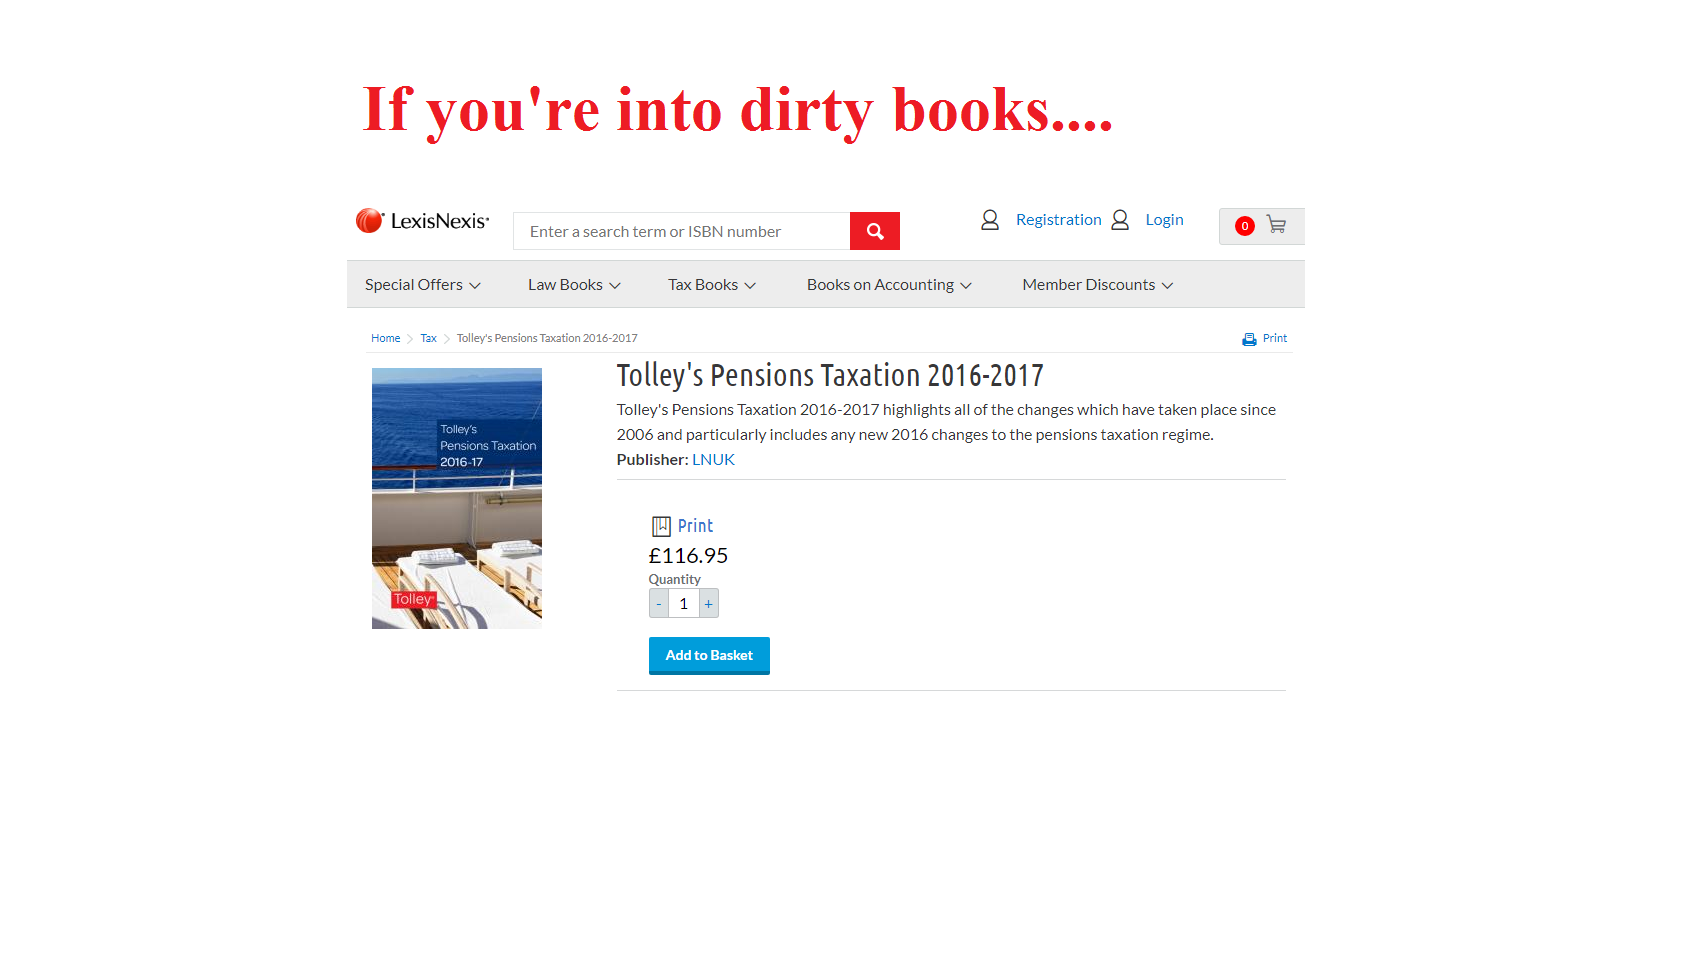 Pension Life Blog - Mastermind - Stephen Ward has published his dirty book - Tolly´s pension taxation 2016-2017 but no investigation by the serious fraud